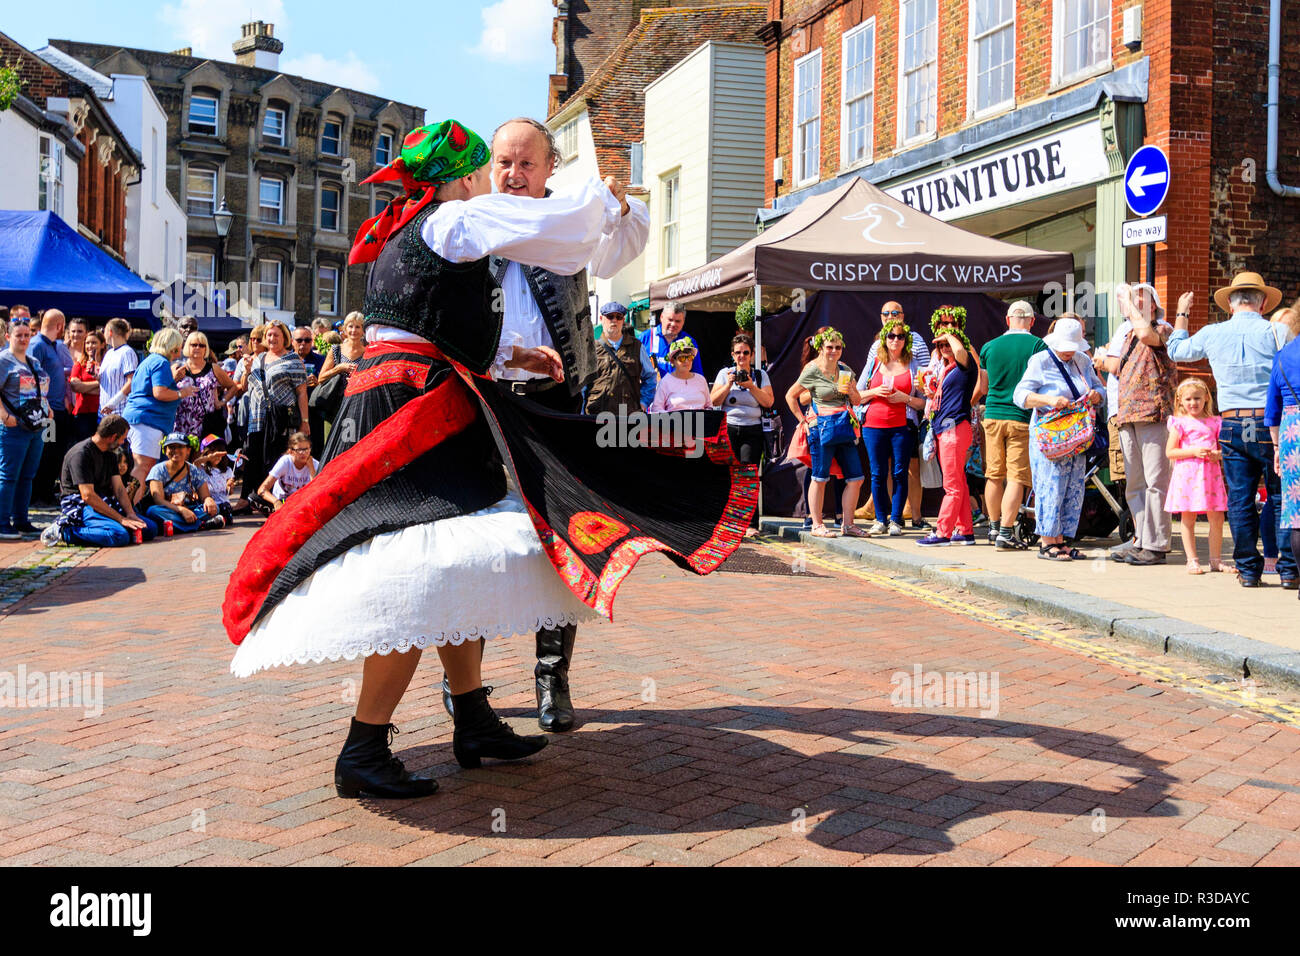 Faversham Hop Festival 2018, senior Hungarian man and woman in traditional costume dancing waltz style in front of audience in town street. Stock Photo